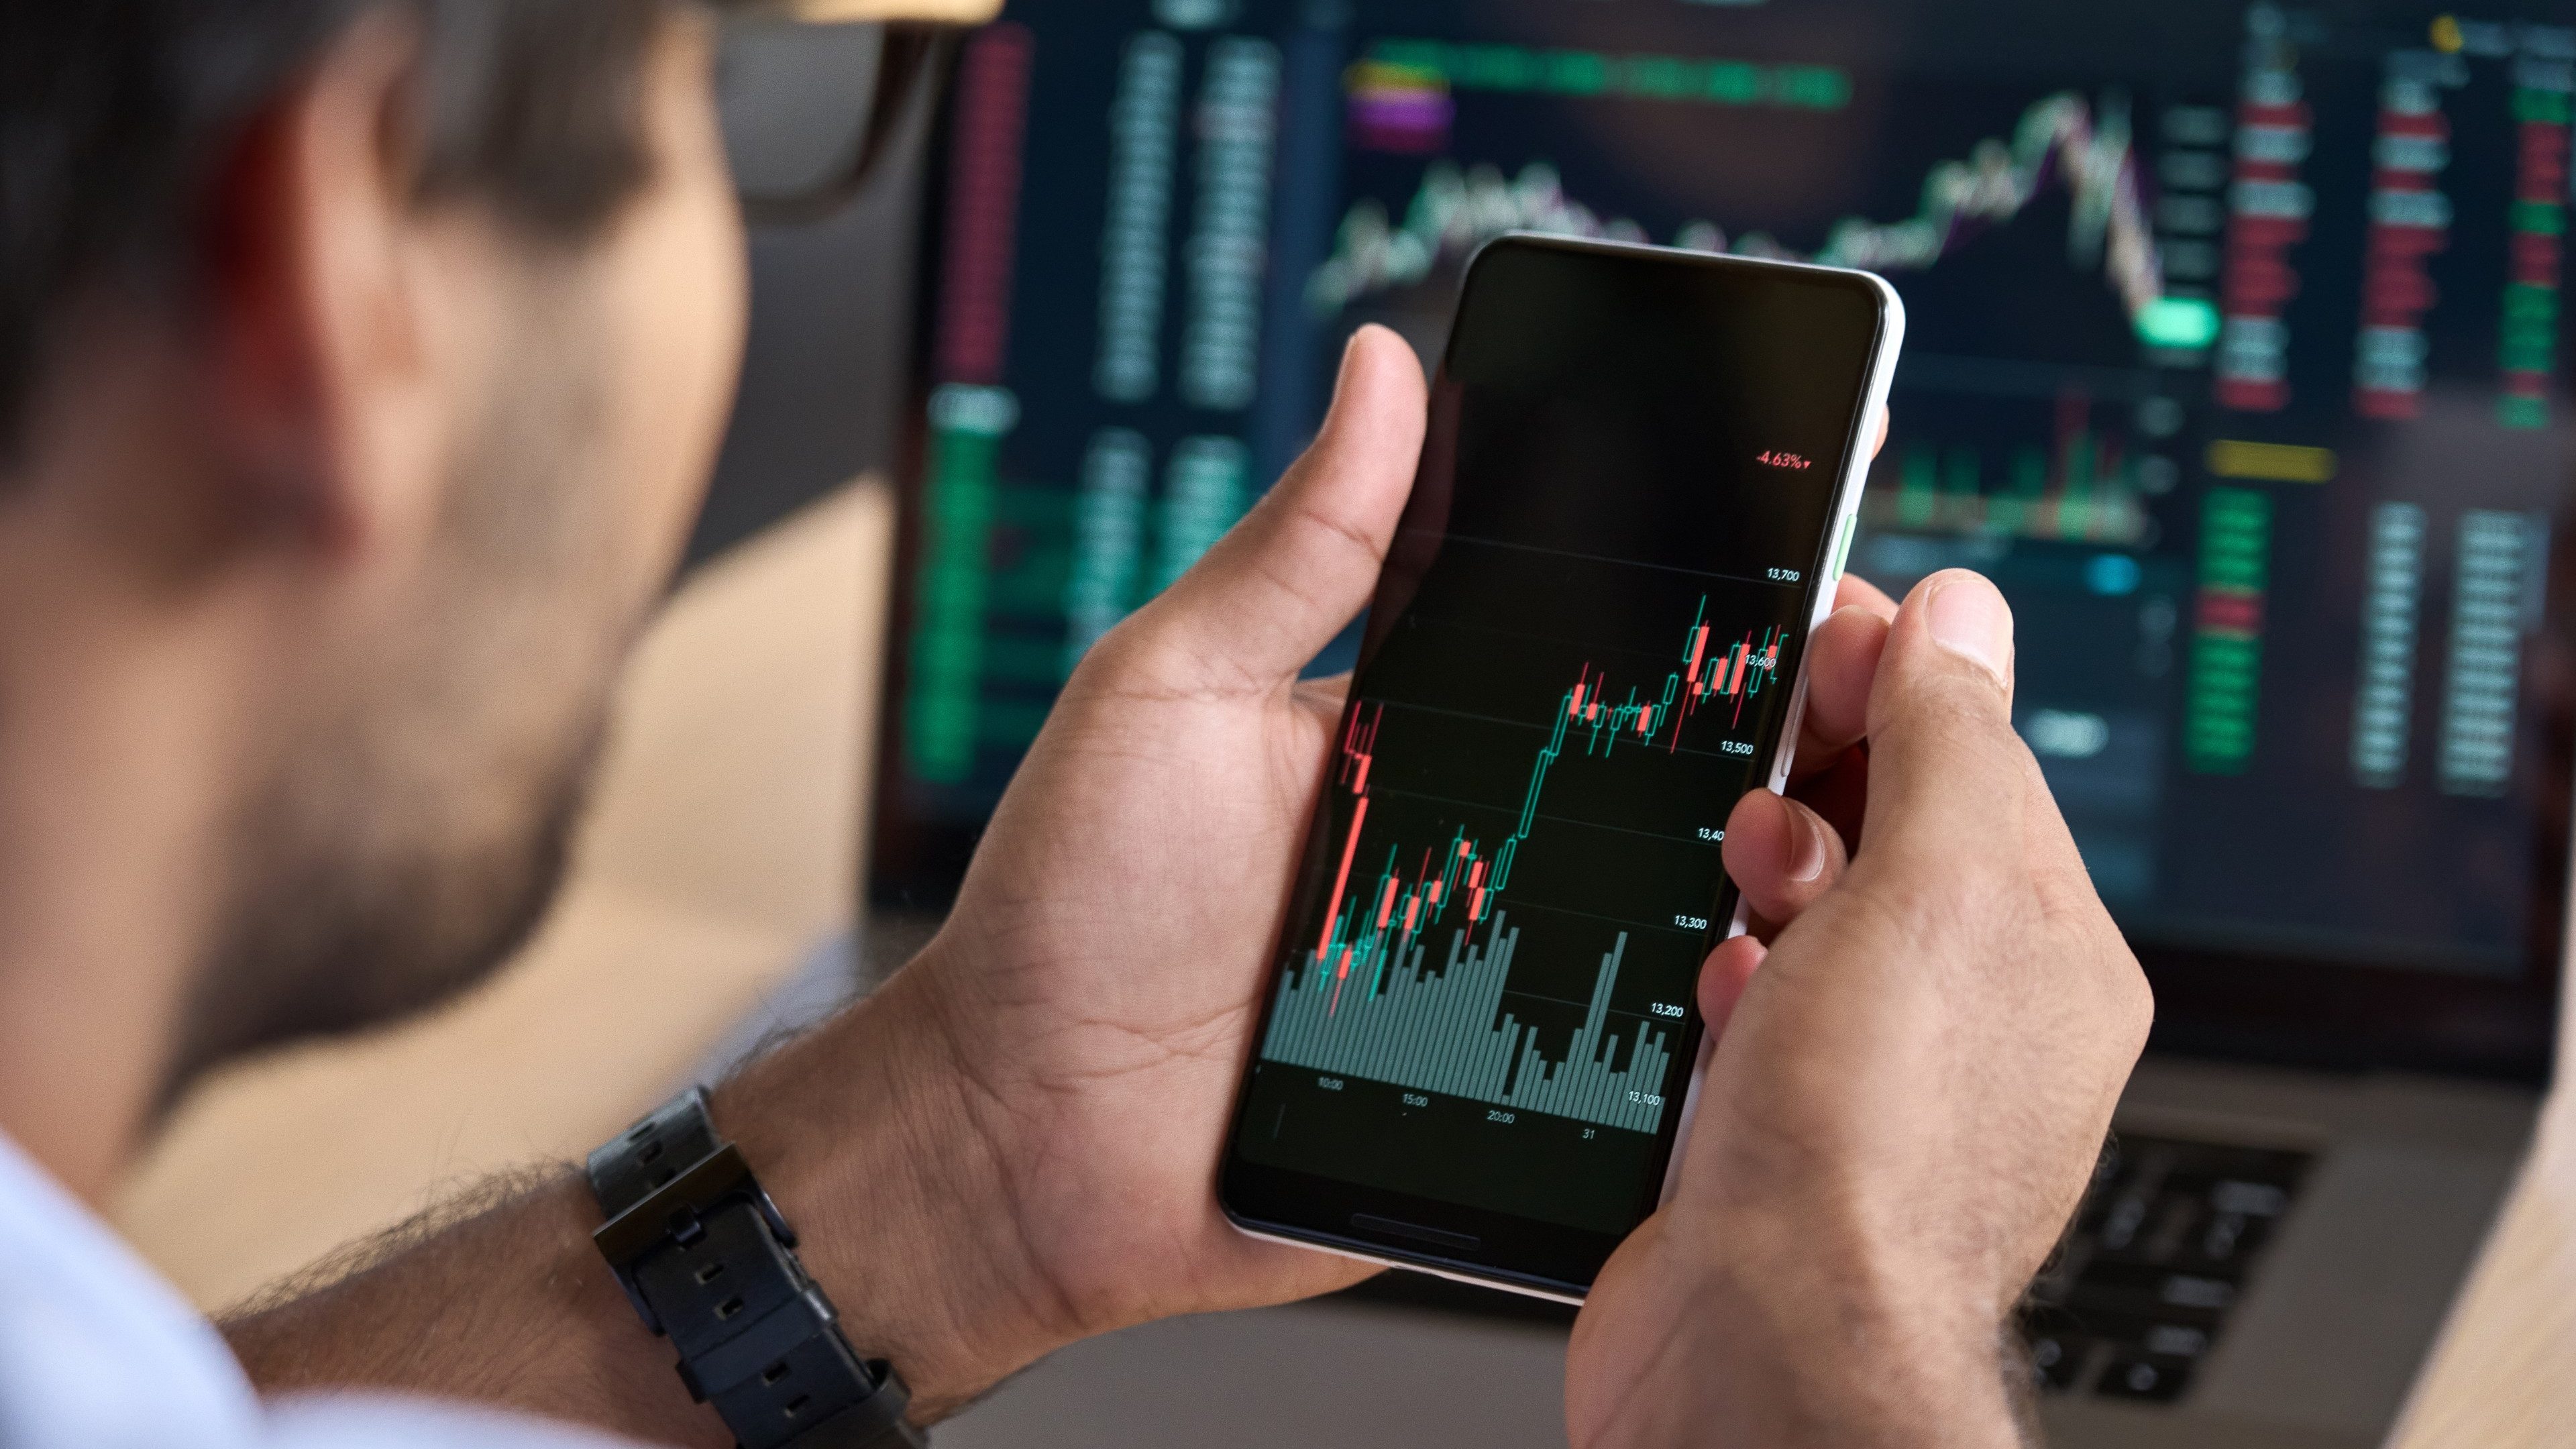 Male trader investor broker crypto analyst holding smartphone in hand analyzing stock market trading charts indexes data checking price using mobile stockmarket exchange app, over shoulder view.